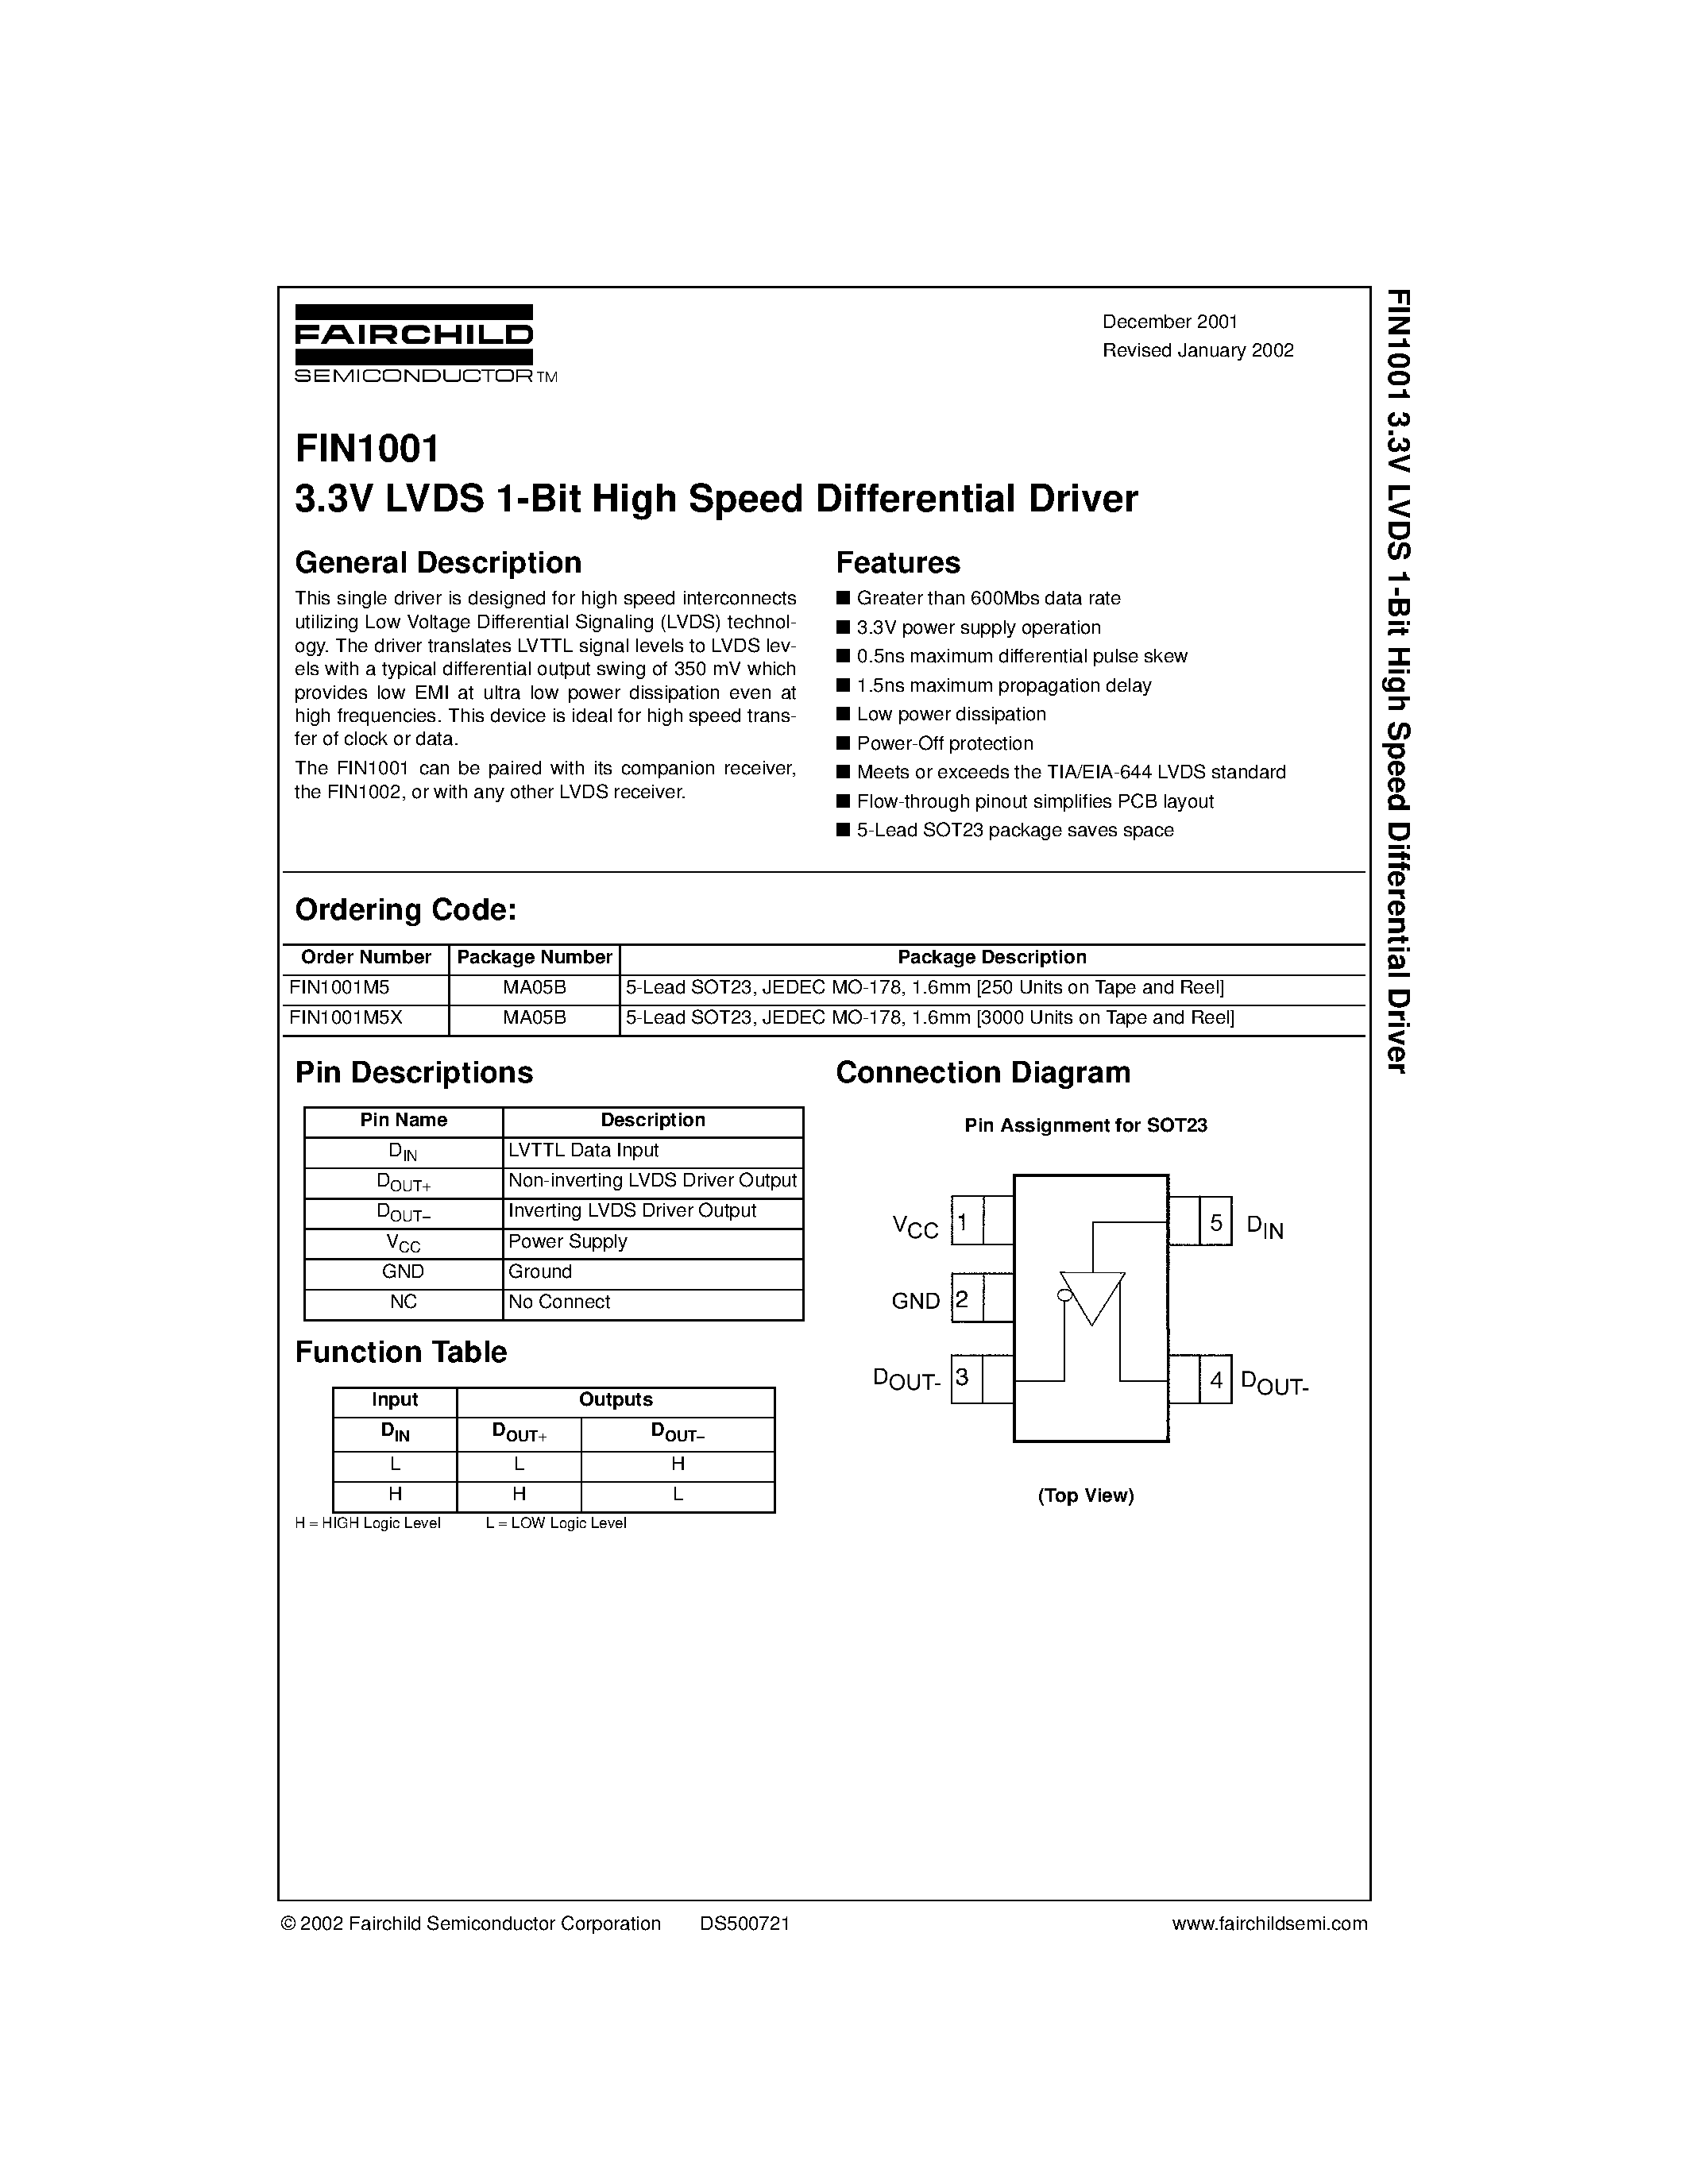 Datasheet FIN1001 - 3.3V LVDS 1-Bit High Speed Differential Driver page 1